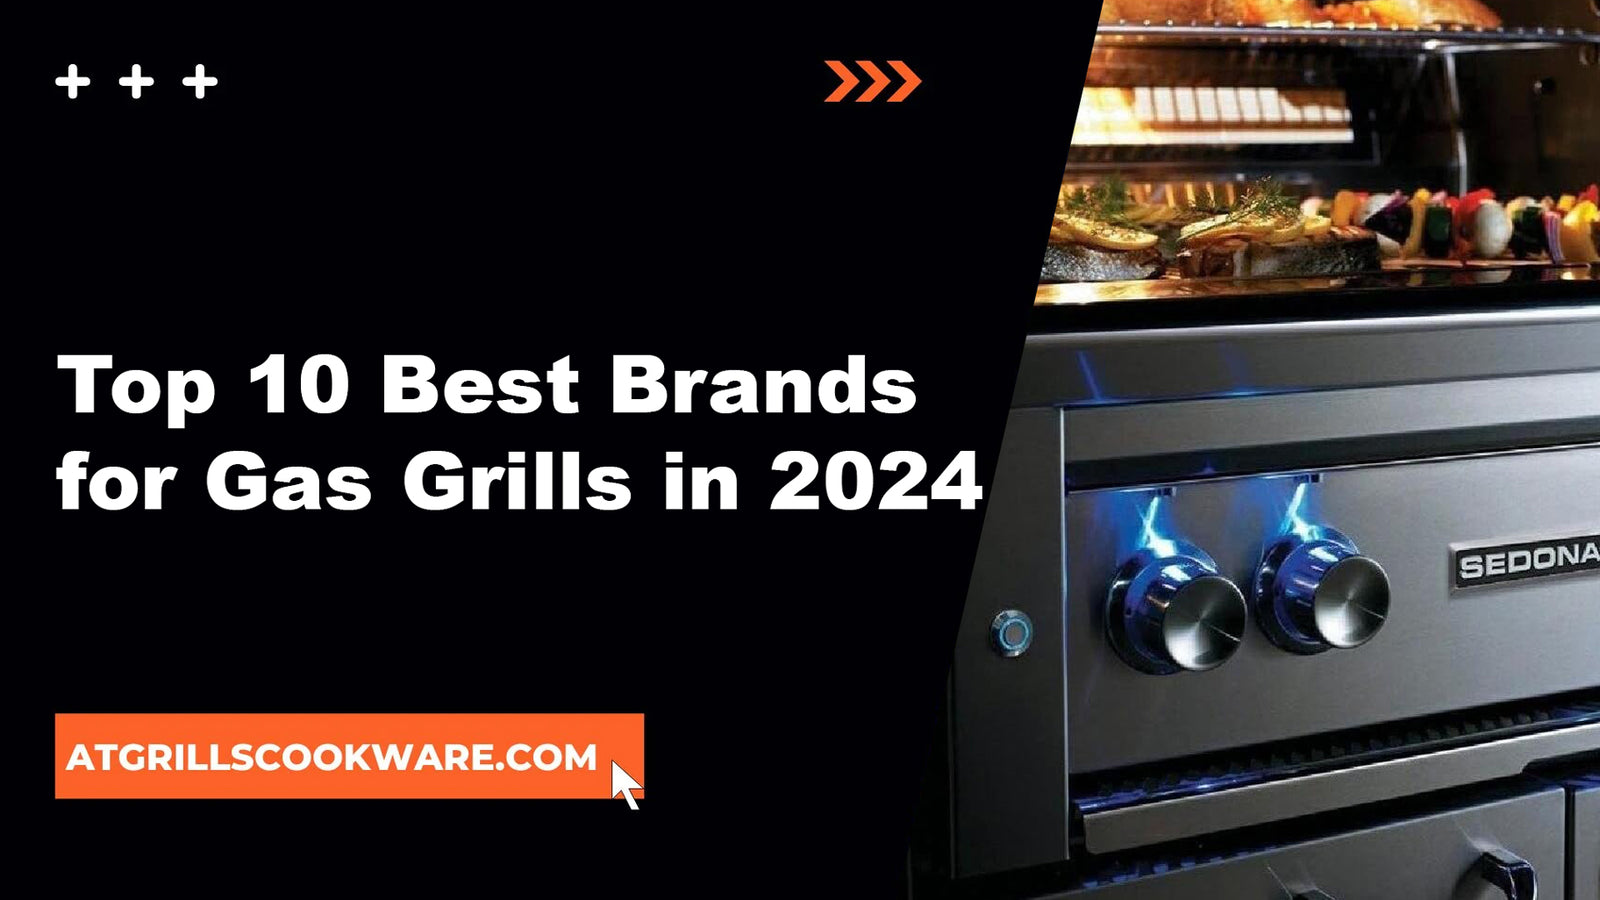 Top 10 Best Brands for Gas Grills in 2024 ATGRILLS